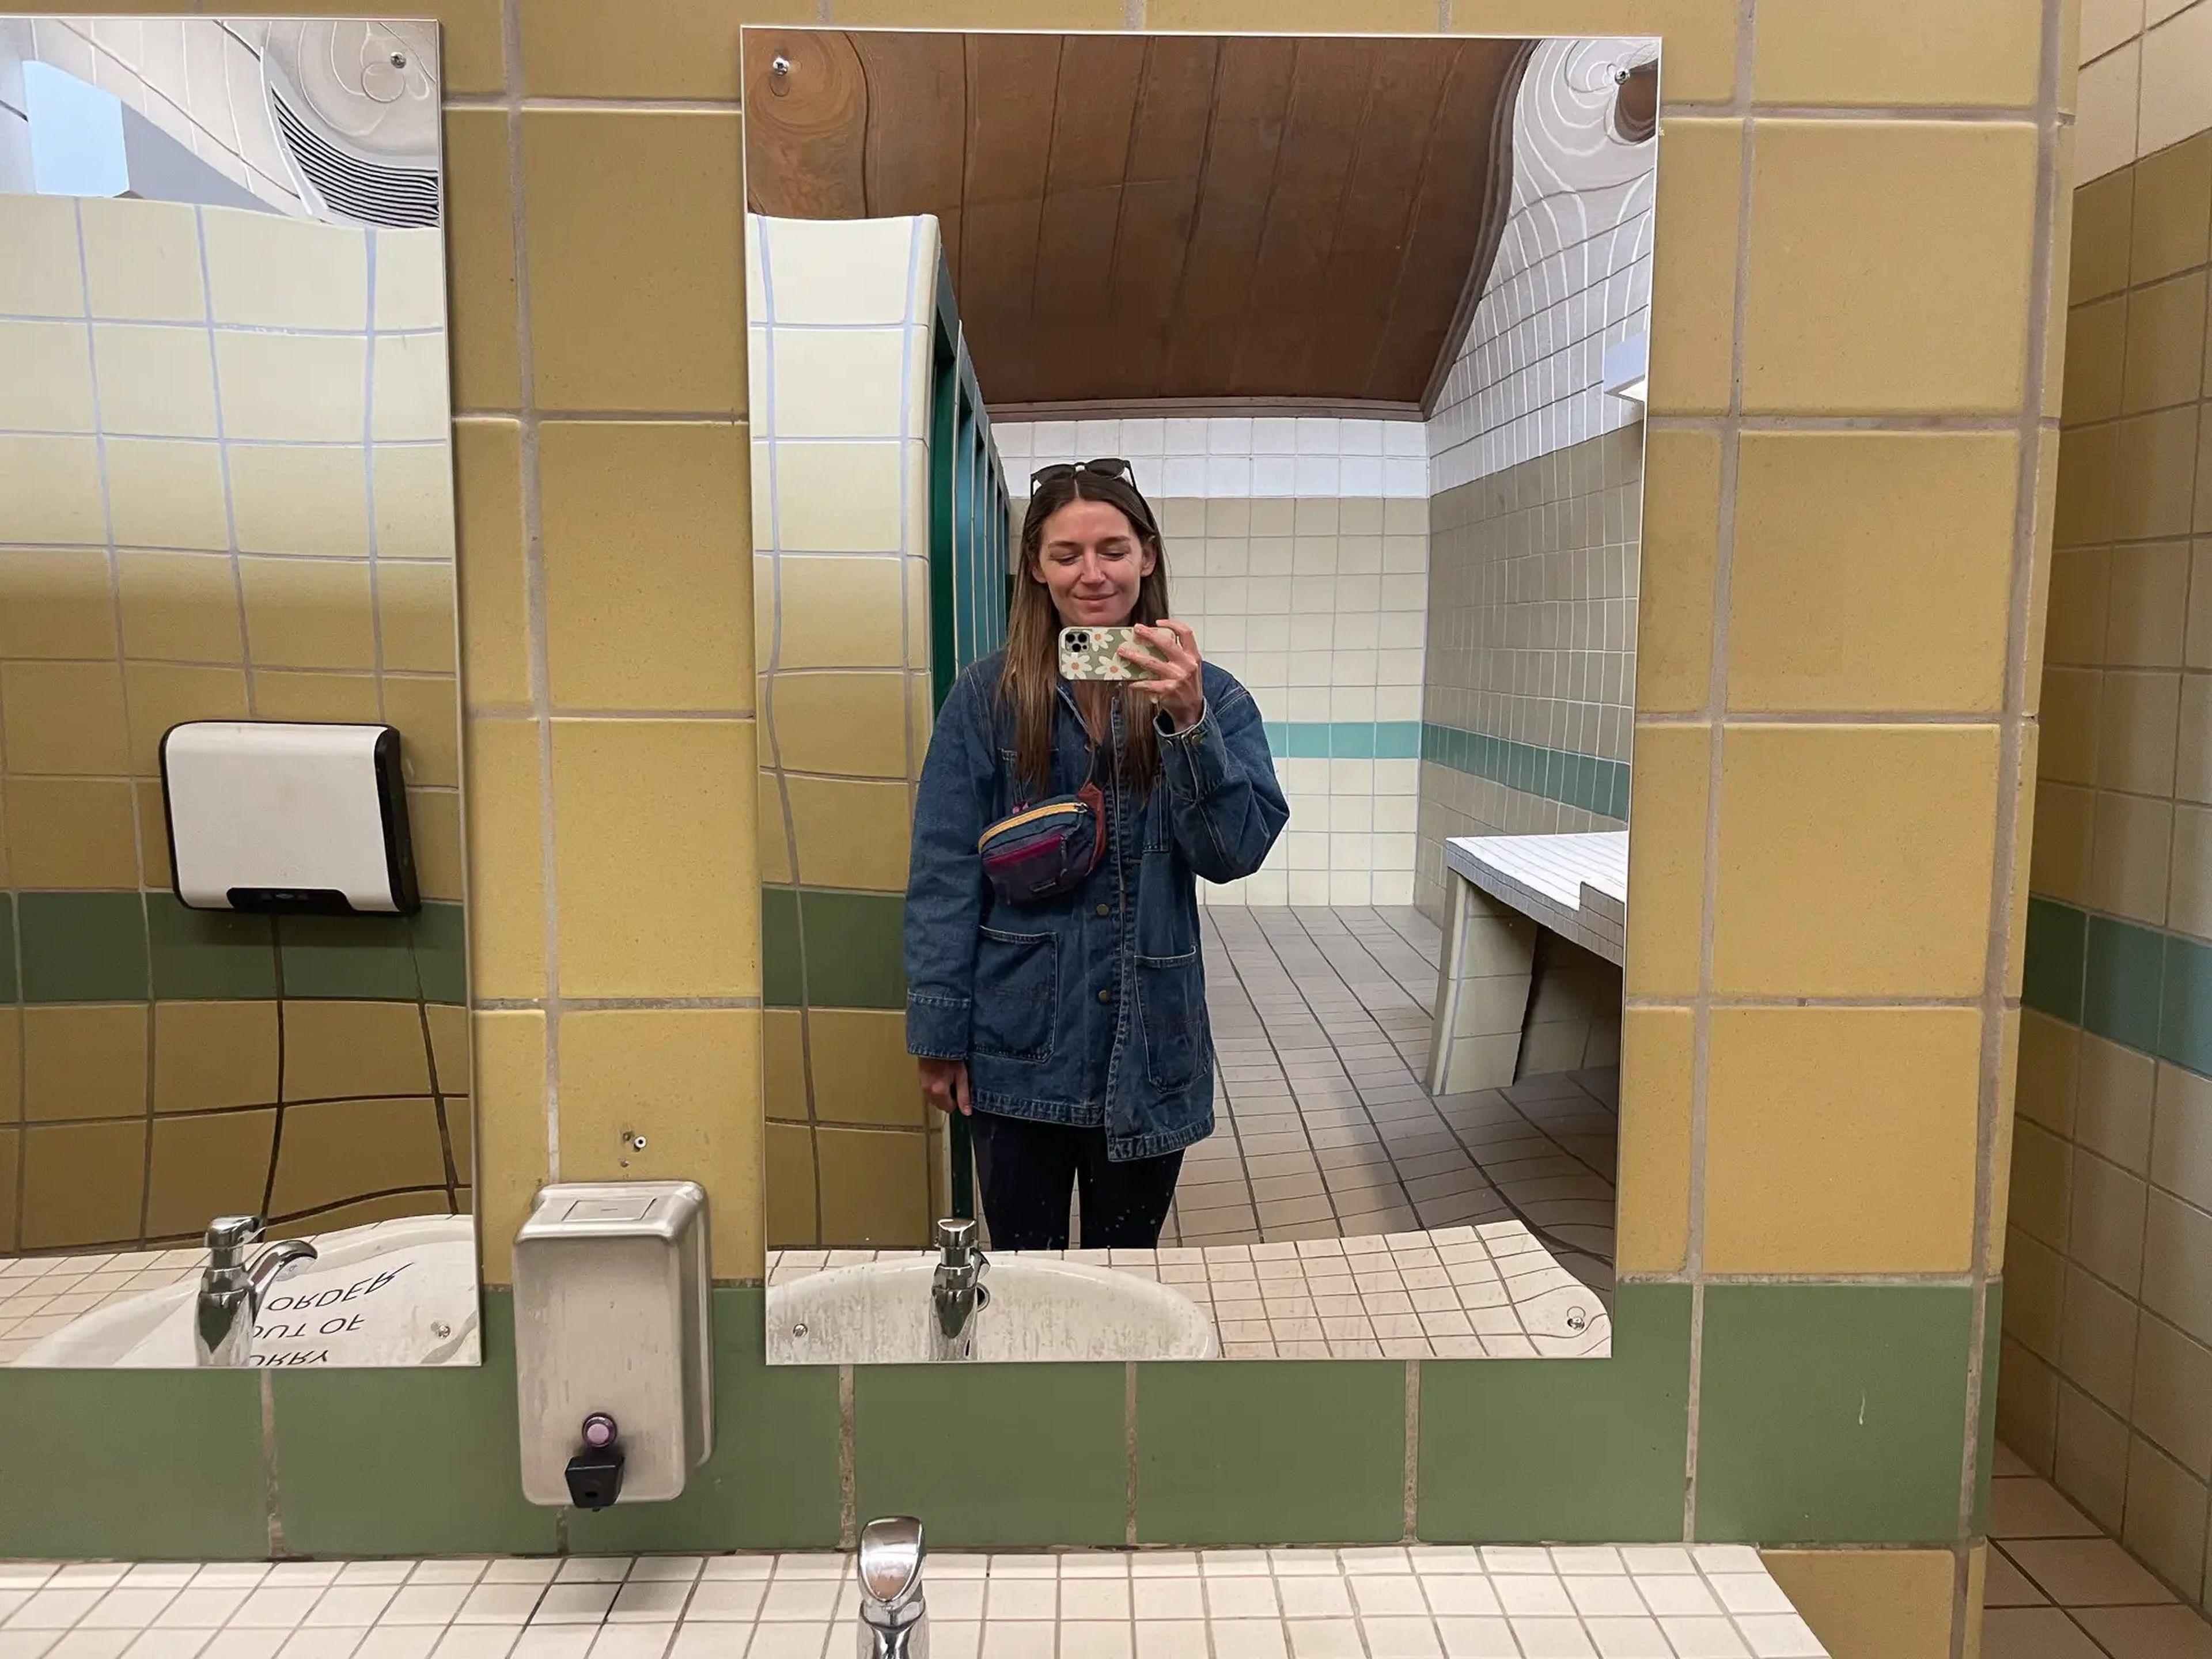 The author in a rest stop bathroom during her two-week road trip in a campervan.